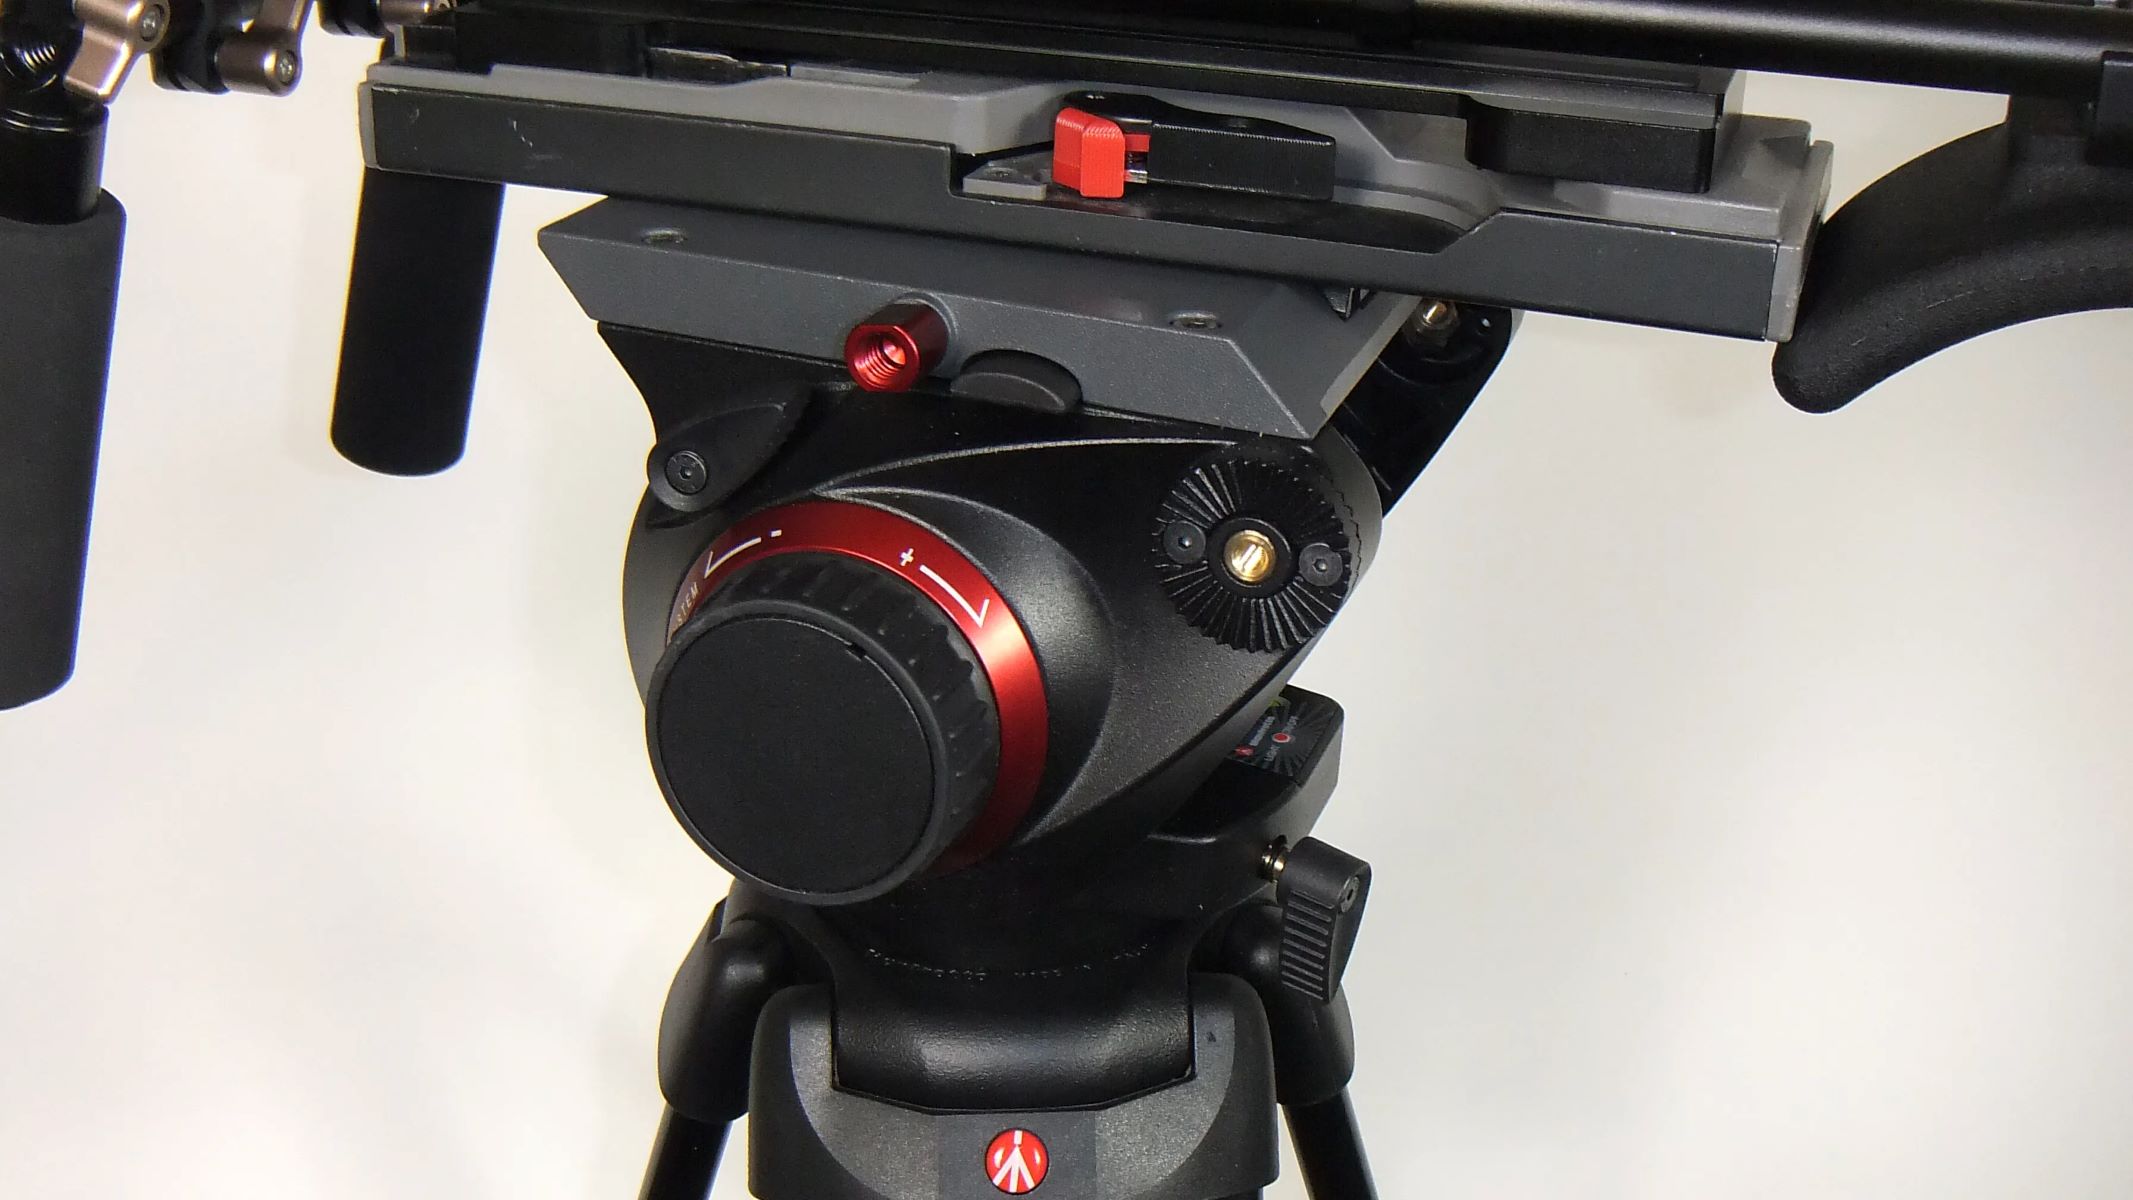 tripod-head-maintenance-removing-the-head-from-a-manfrotto-tripod